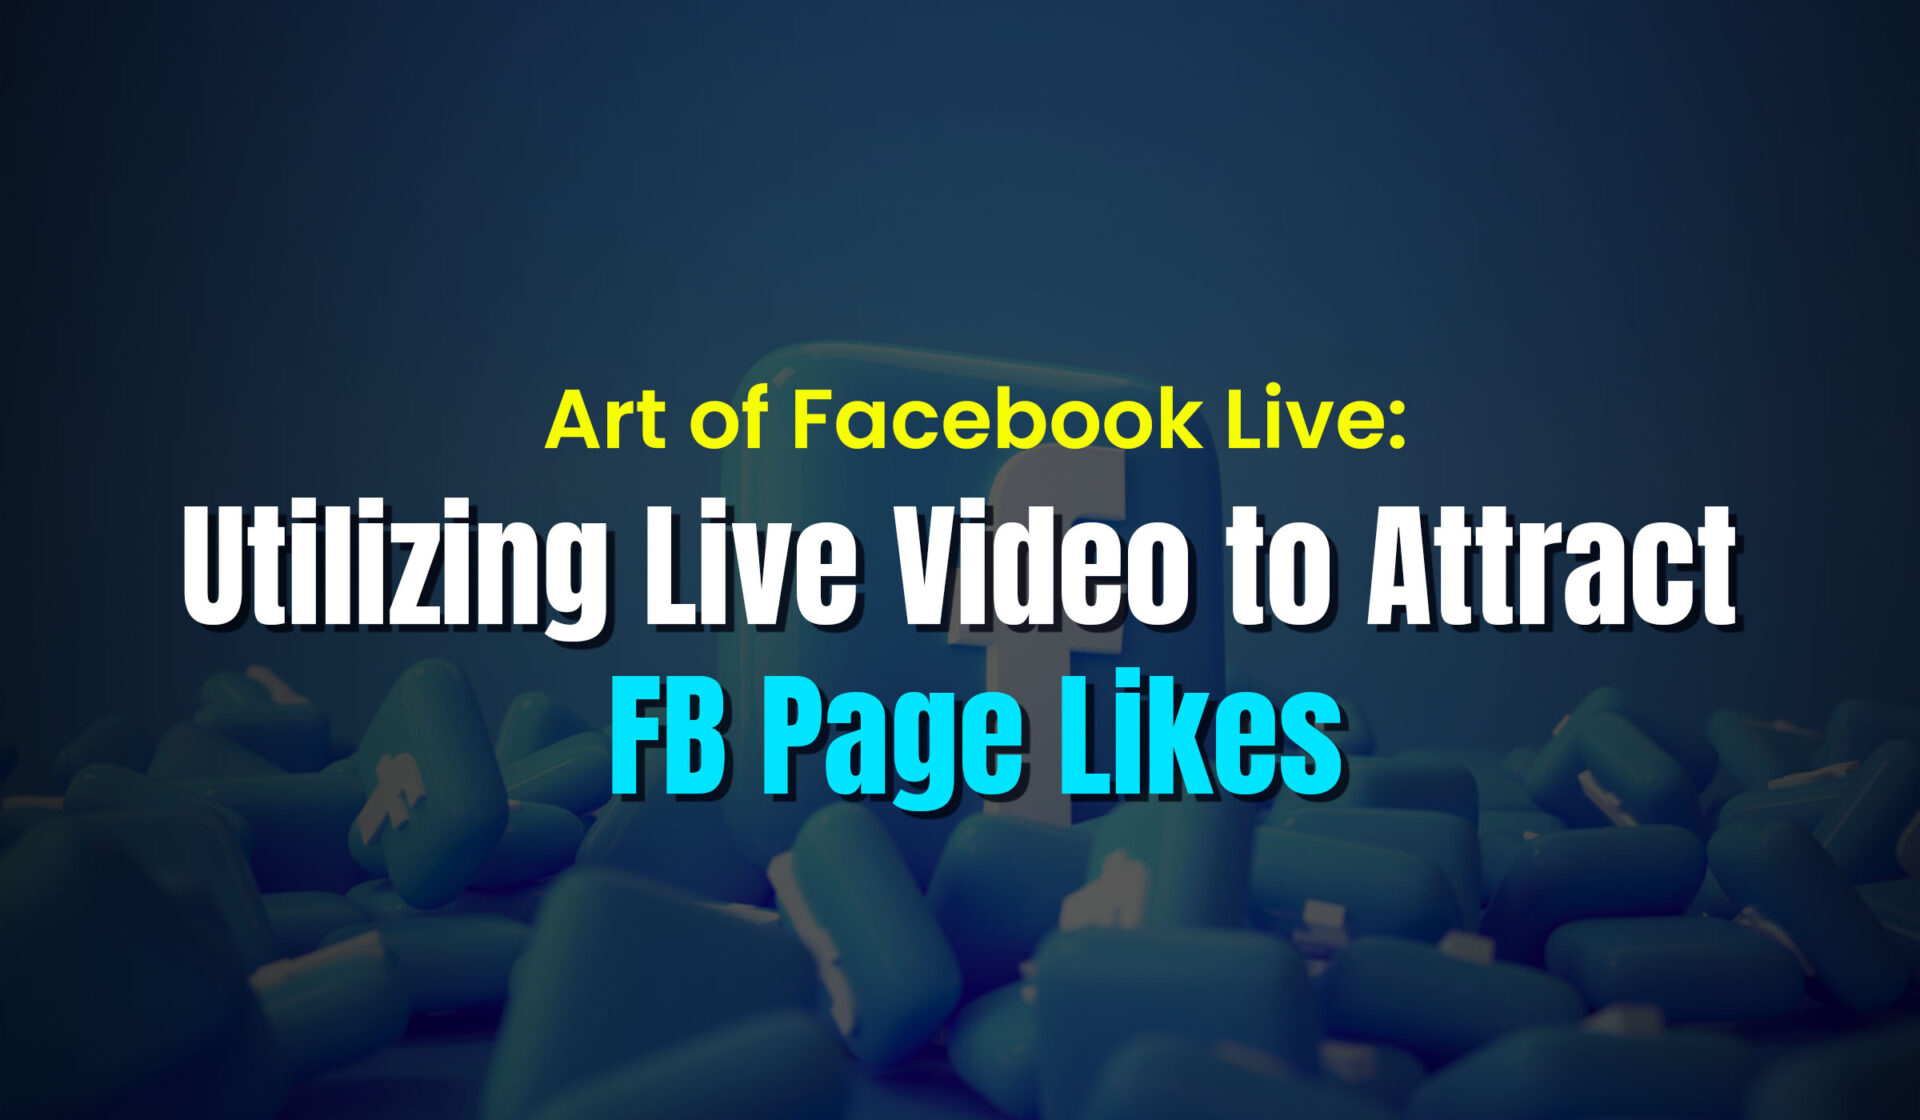 Utilizing Live Video to Attract FB Page Likes